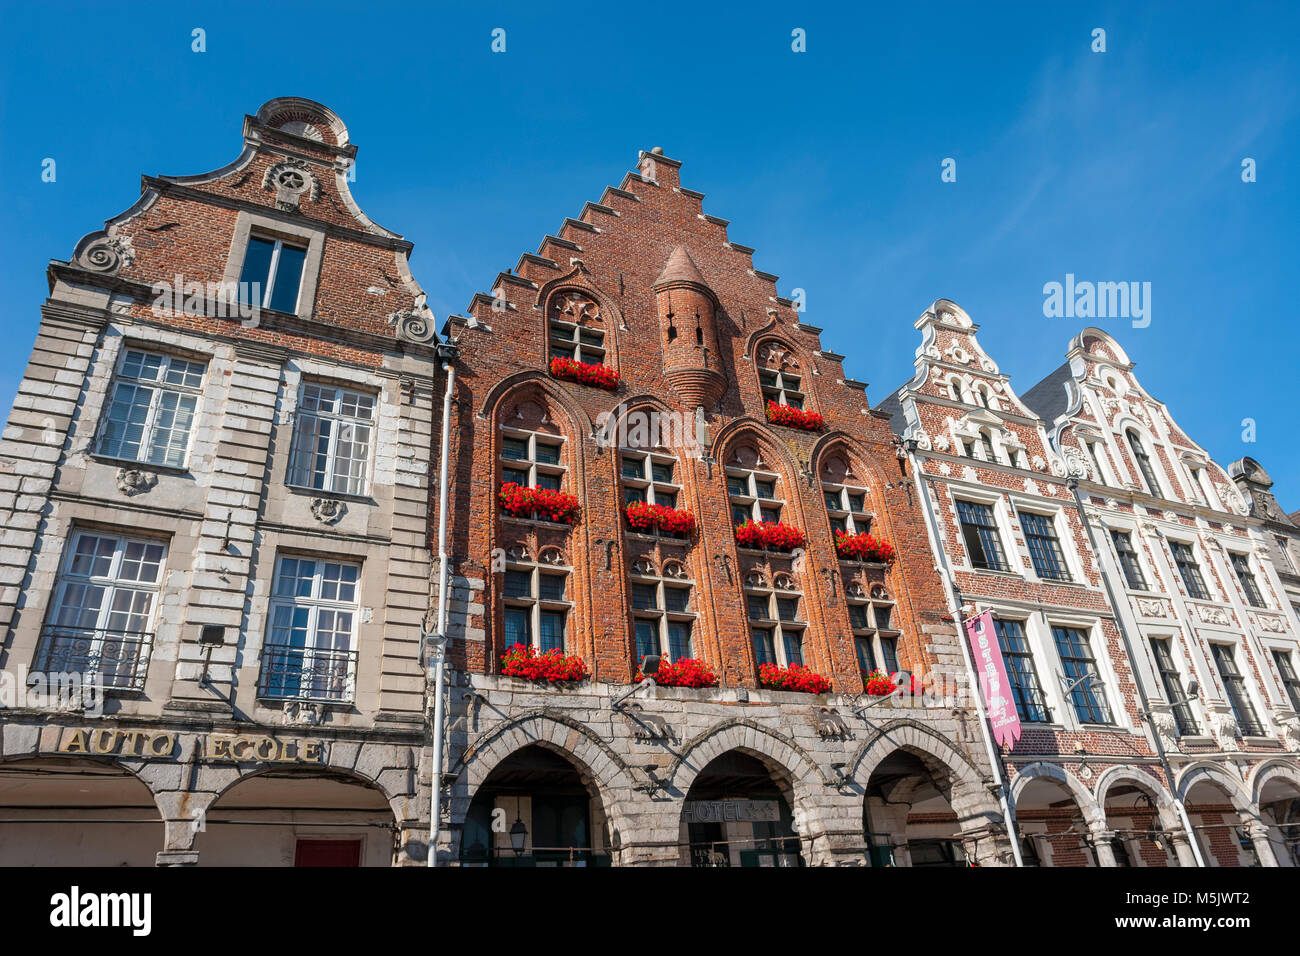 Architecture at Grand Place, Arras, France Stock Photo - Alamy